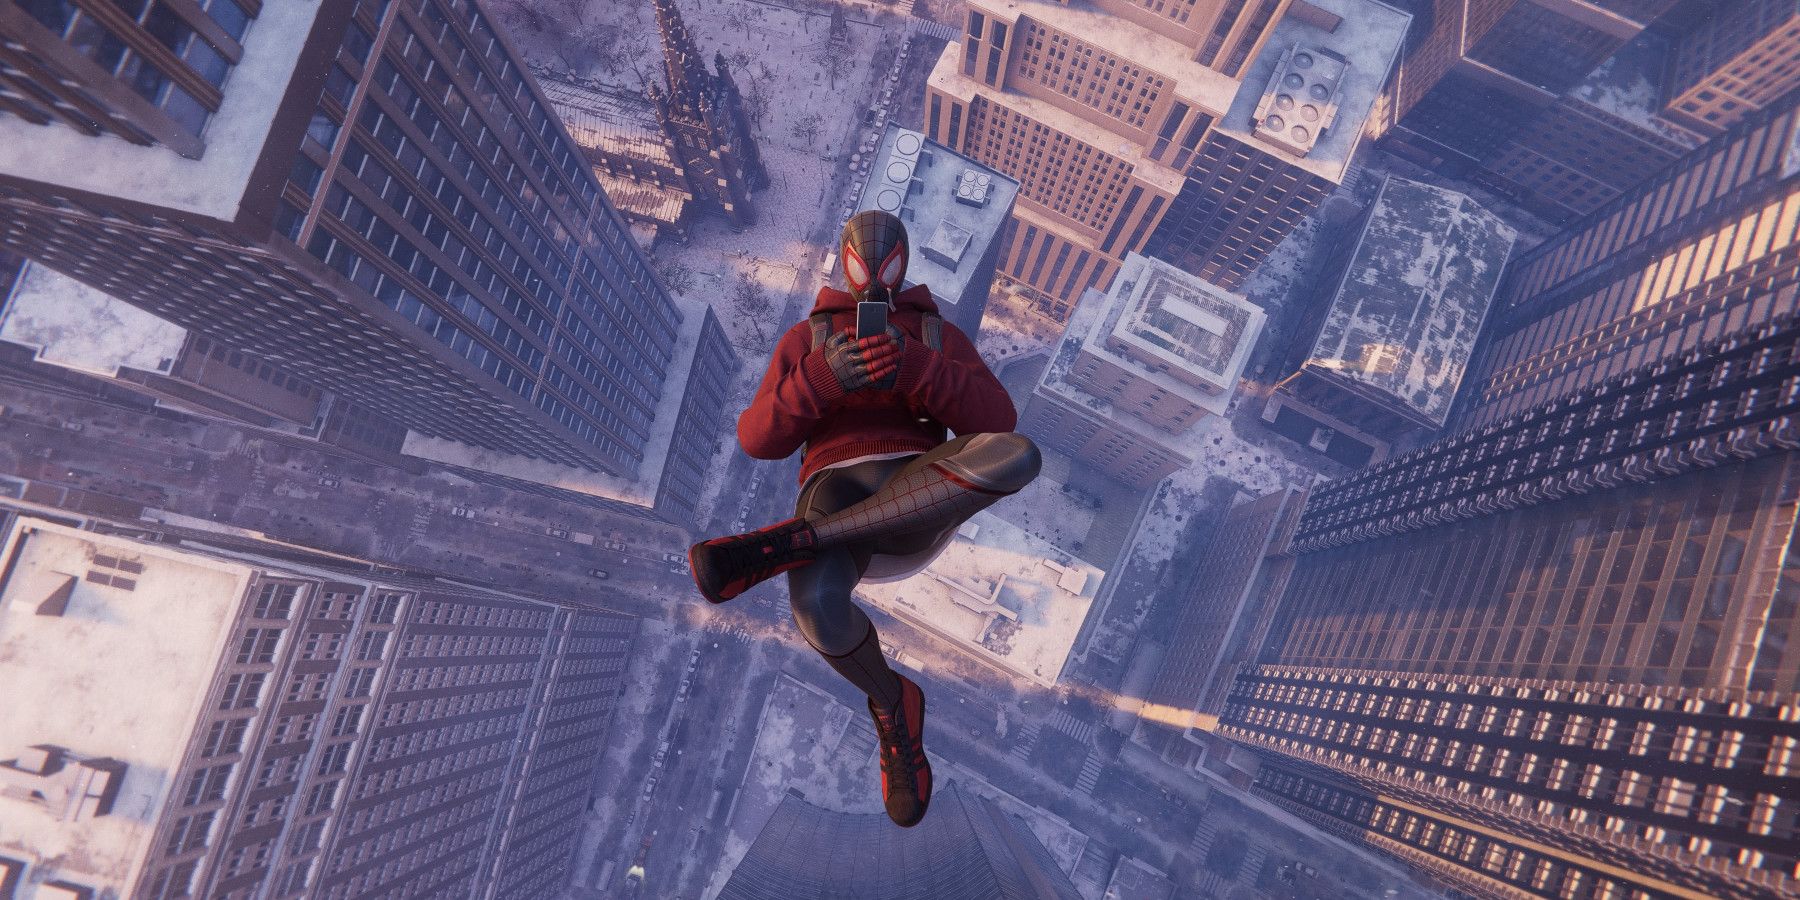 Marvel's Spider-Man 2 - Jumping from the Highest Point 